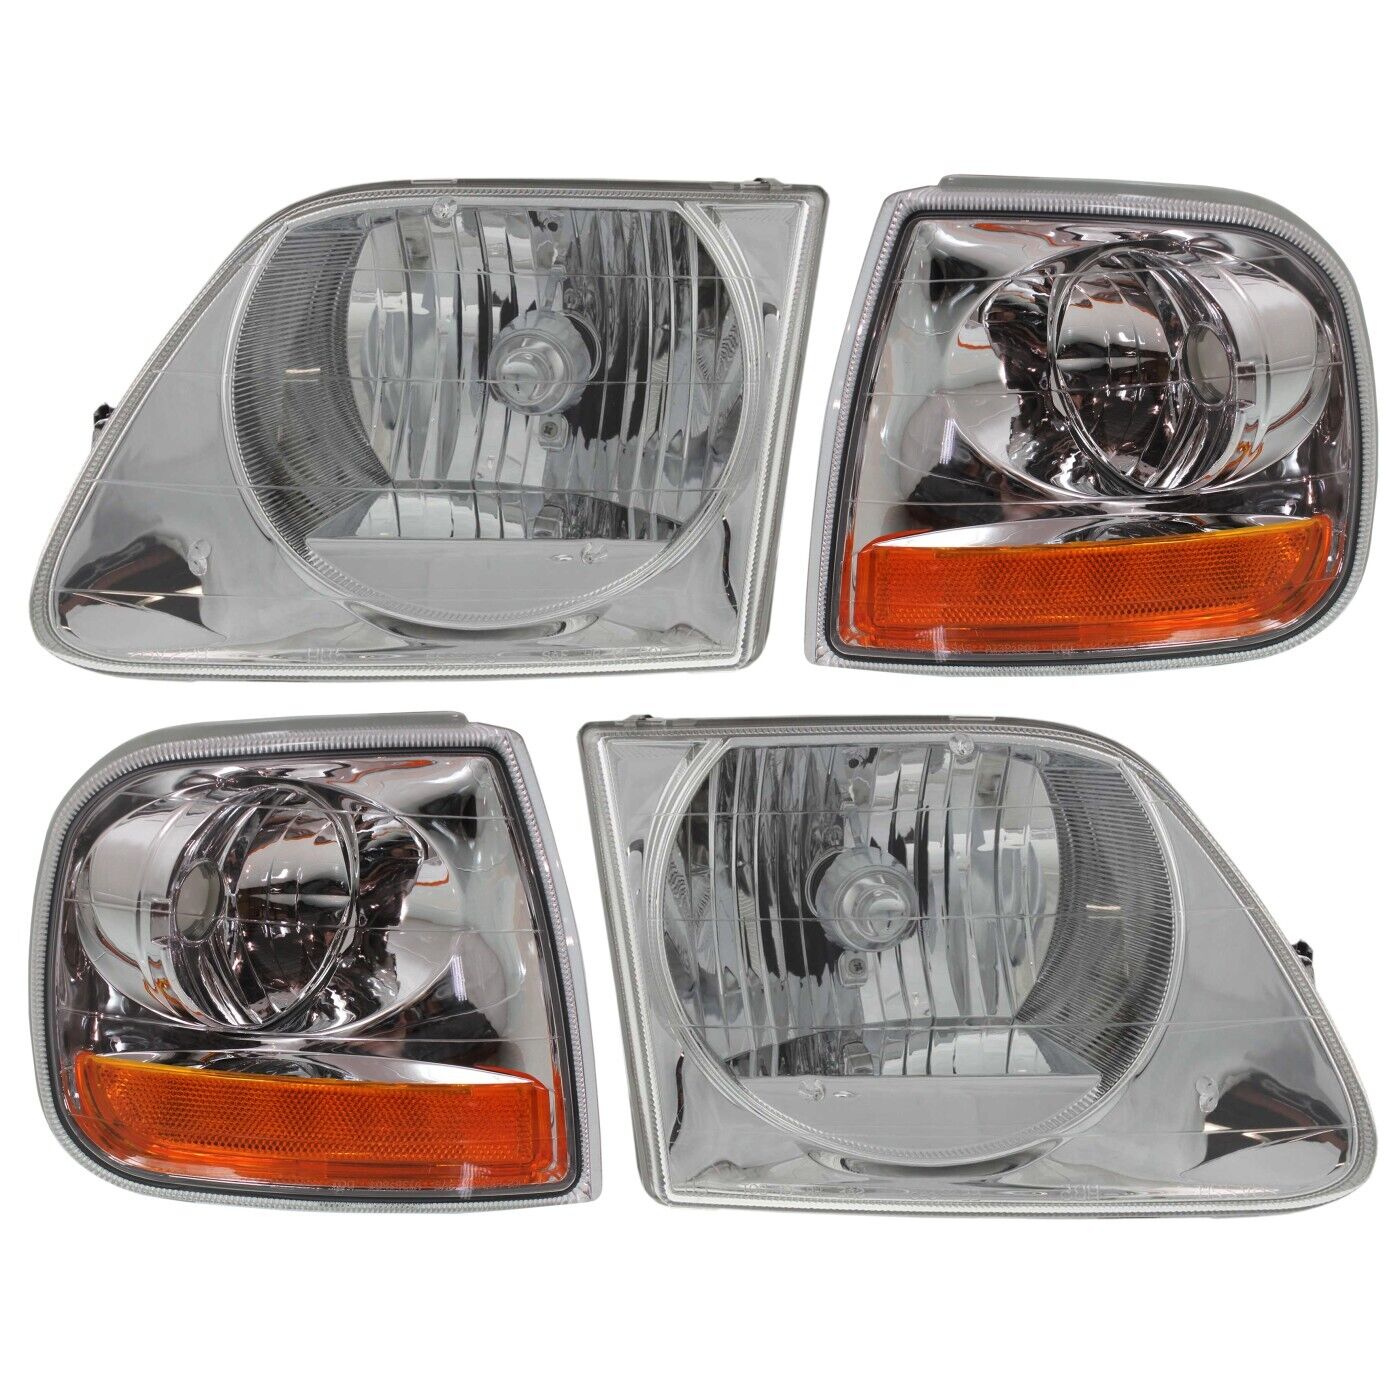 Headlight Kit For 1997-2003 Ford F-150 Left and Right With Corner Lights